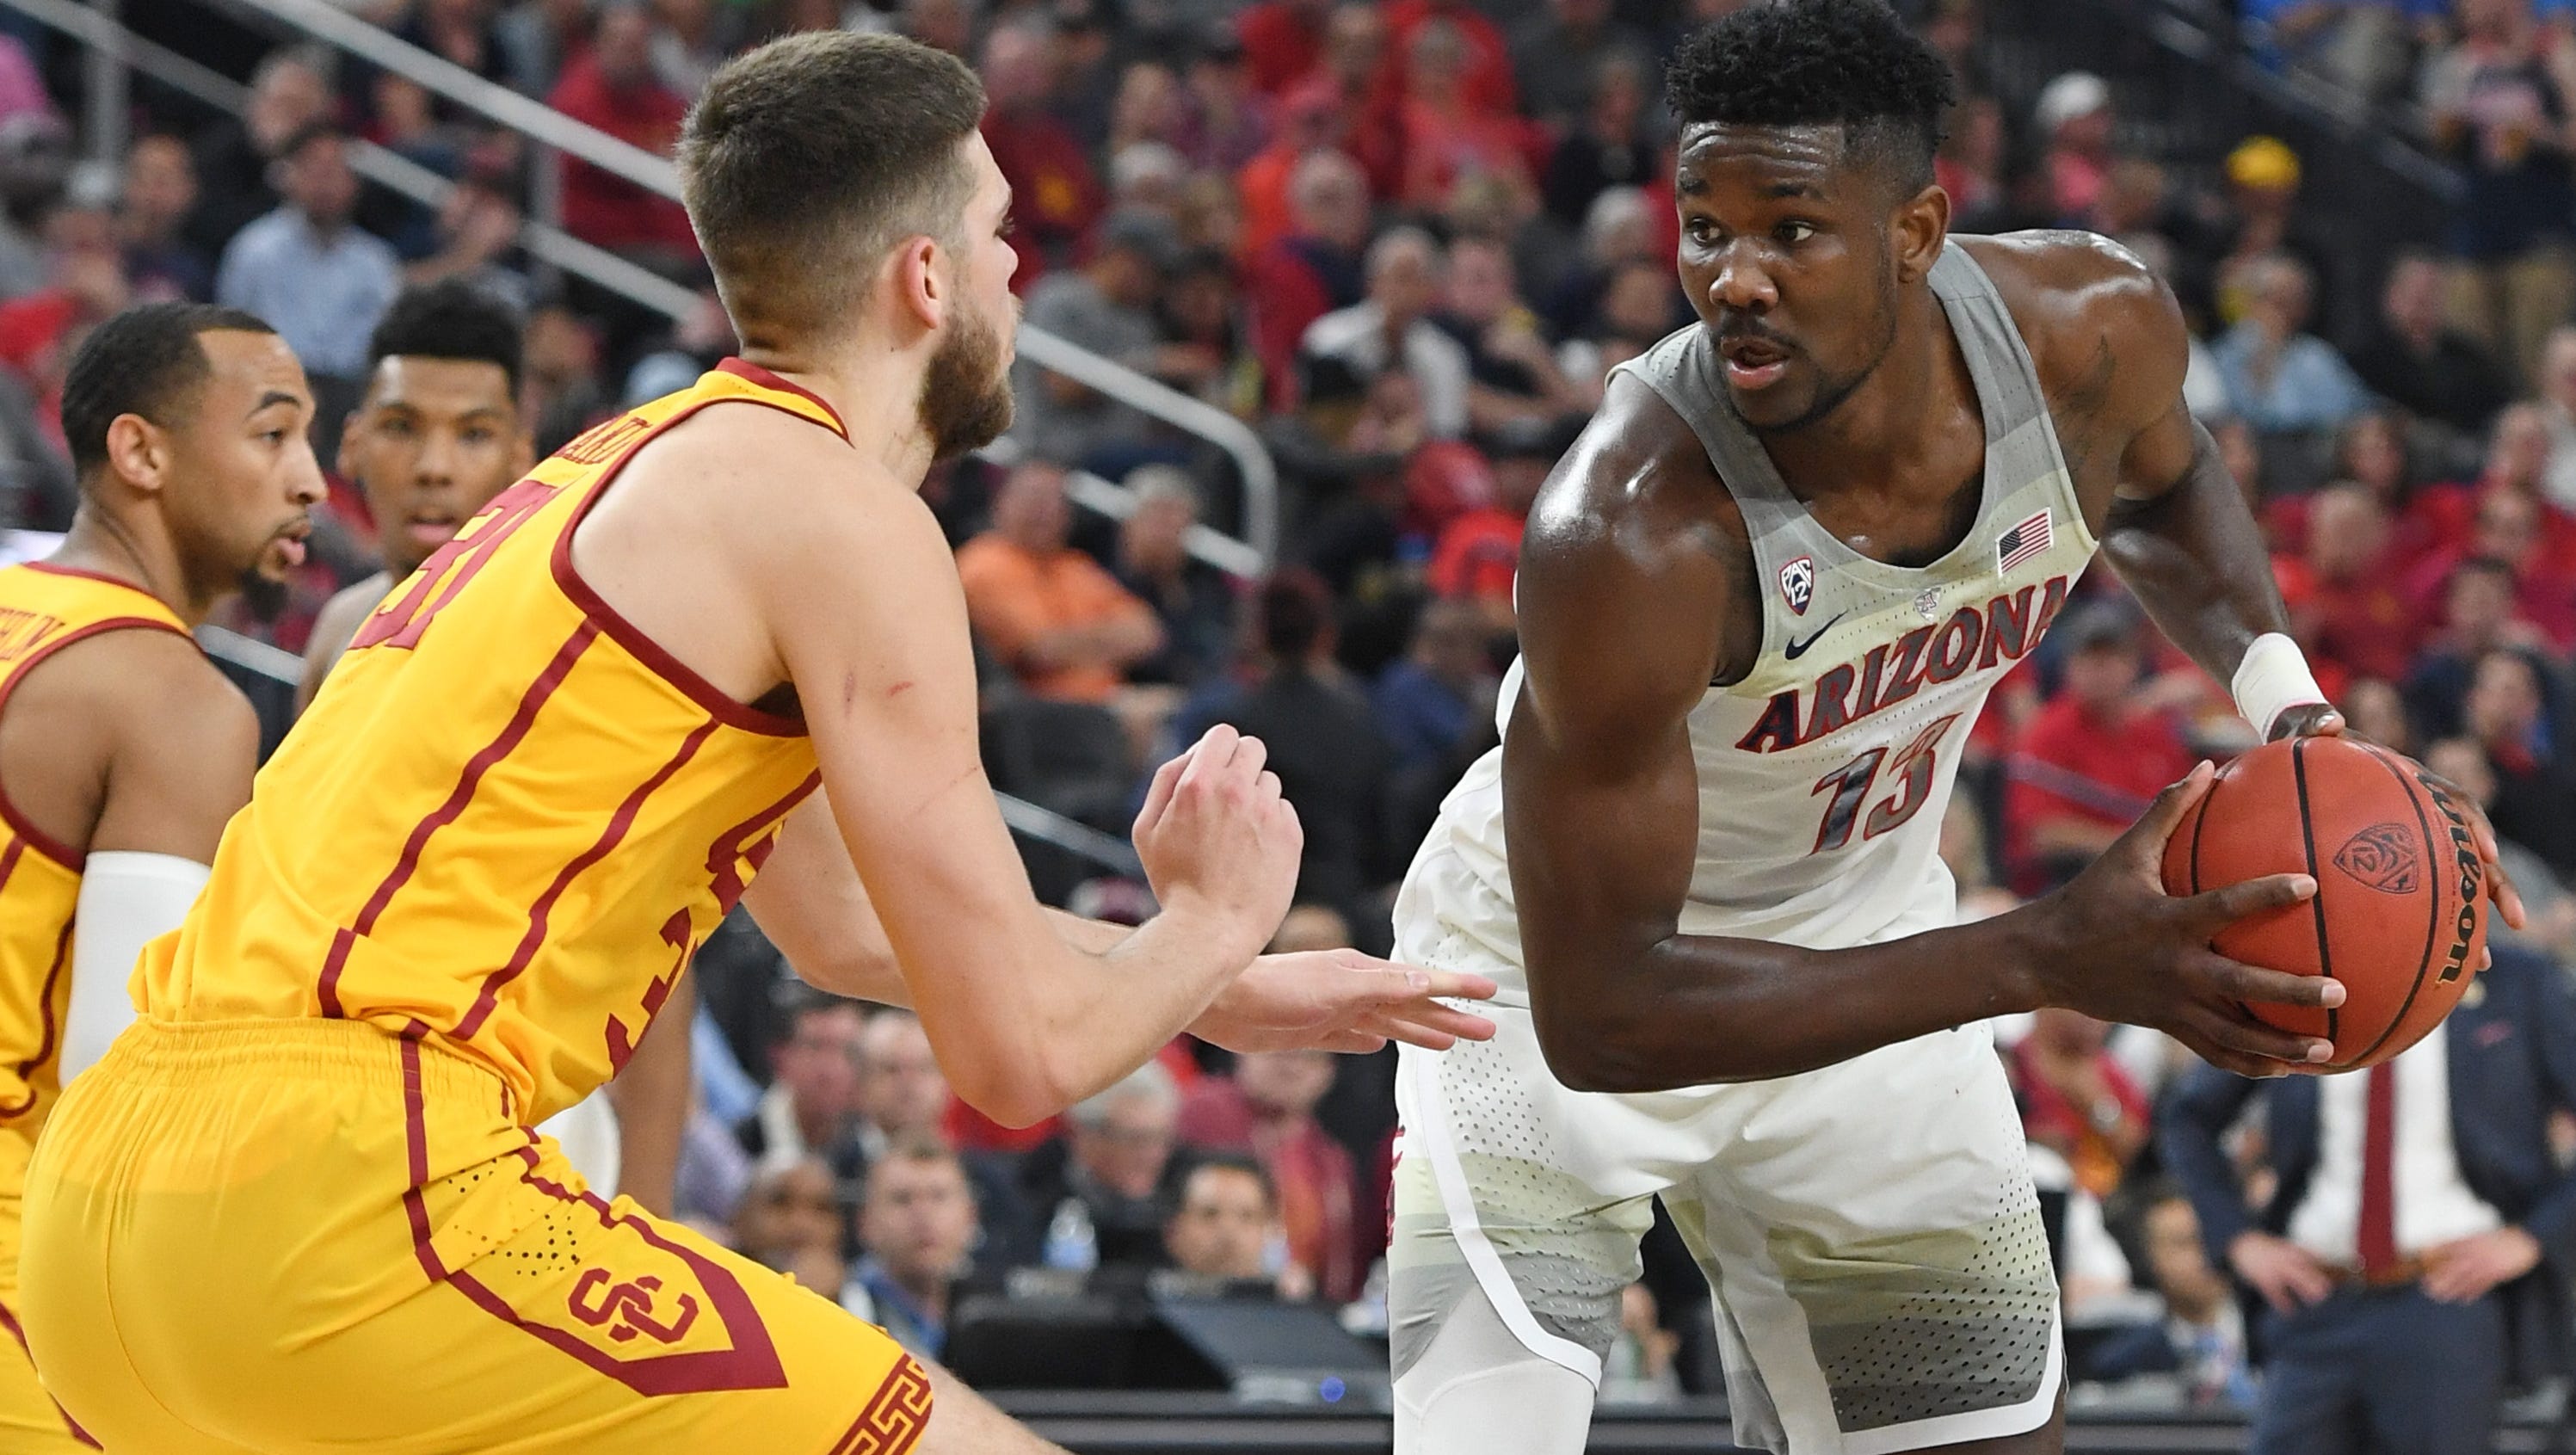 1. Phoenix Suns: DeAndre Ayton, C, Fr., Arizona. The Suns won the lottery and look to be enamored with Ayton, who played nearby in Tucson. Ayton, 19, could be the final answer to their troubled history of drafting big men, with Dragan Bender, Marquese Chriss and Alex Len not panning out so far. With a nucleus of Devin Booker and Josh Jackson with Ayton, the Suns could be on the road to getting it right.